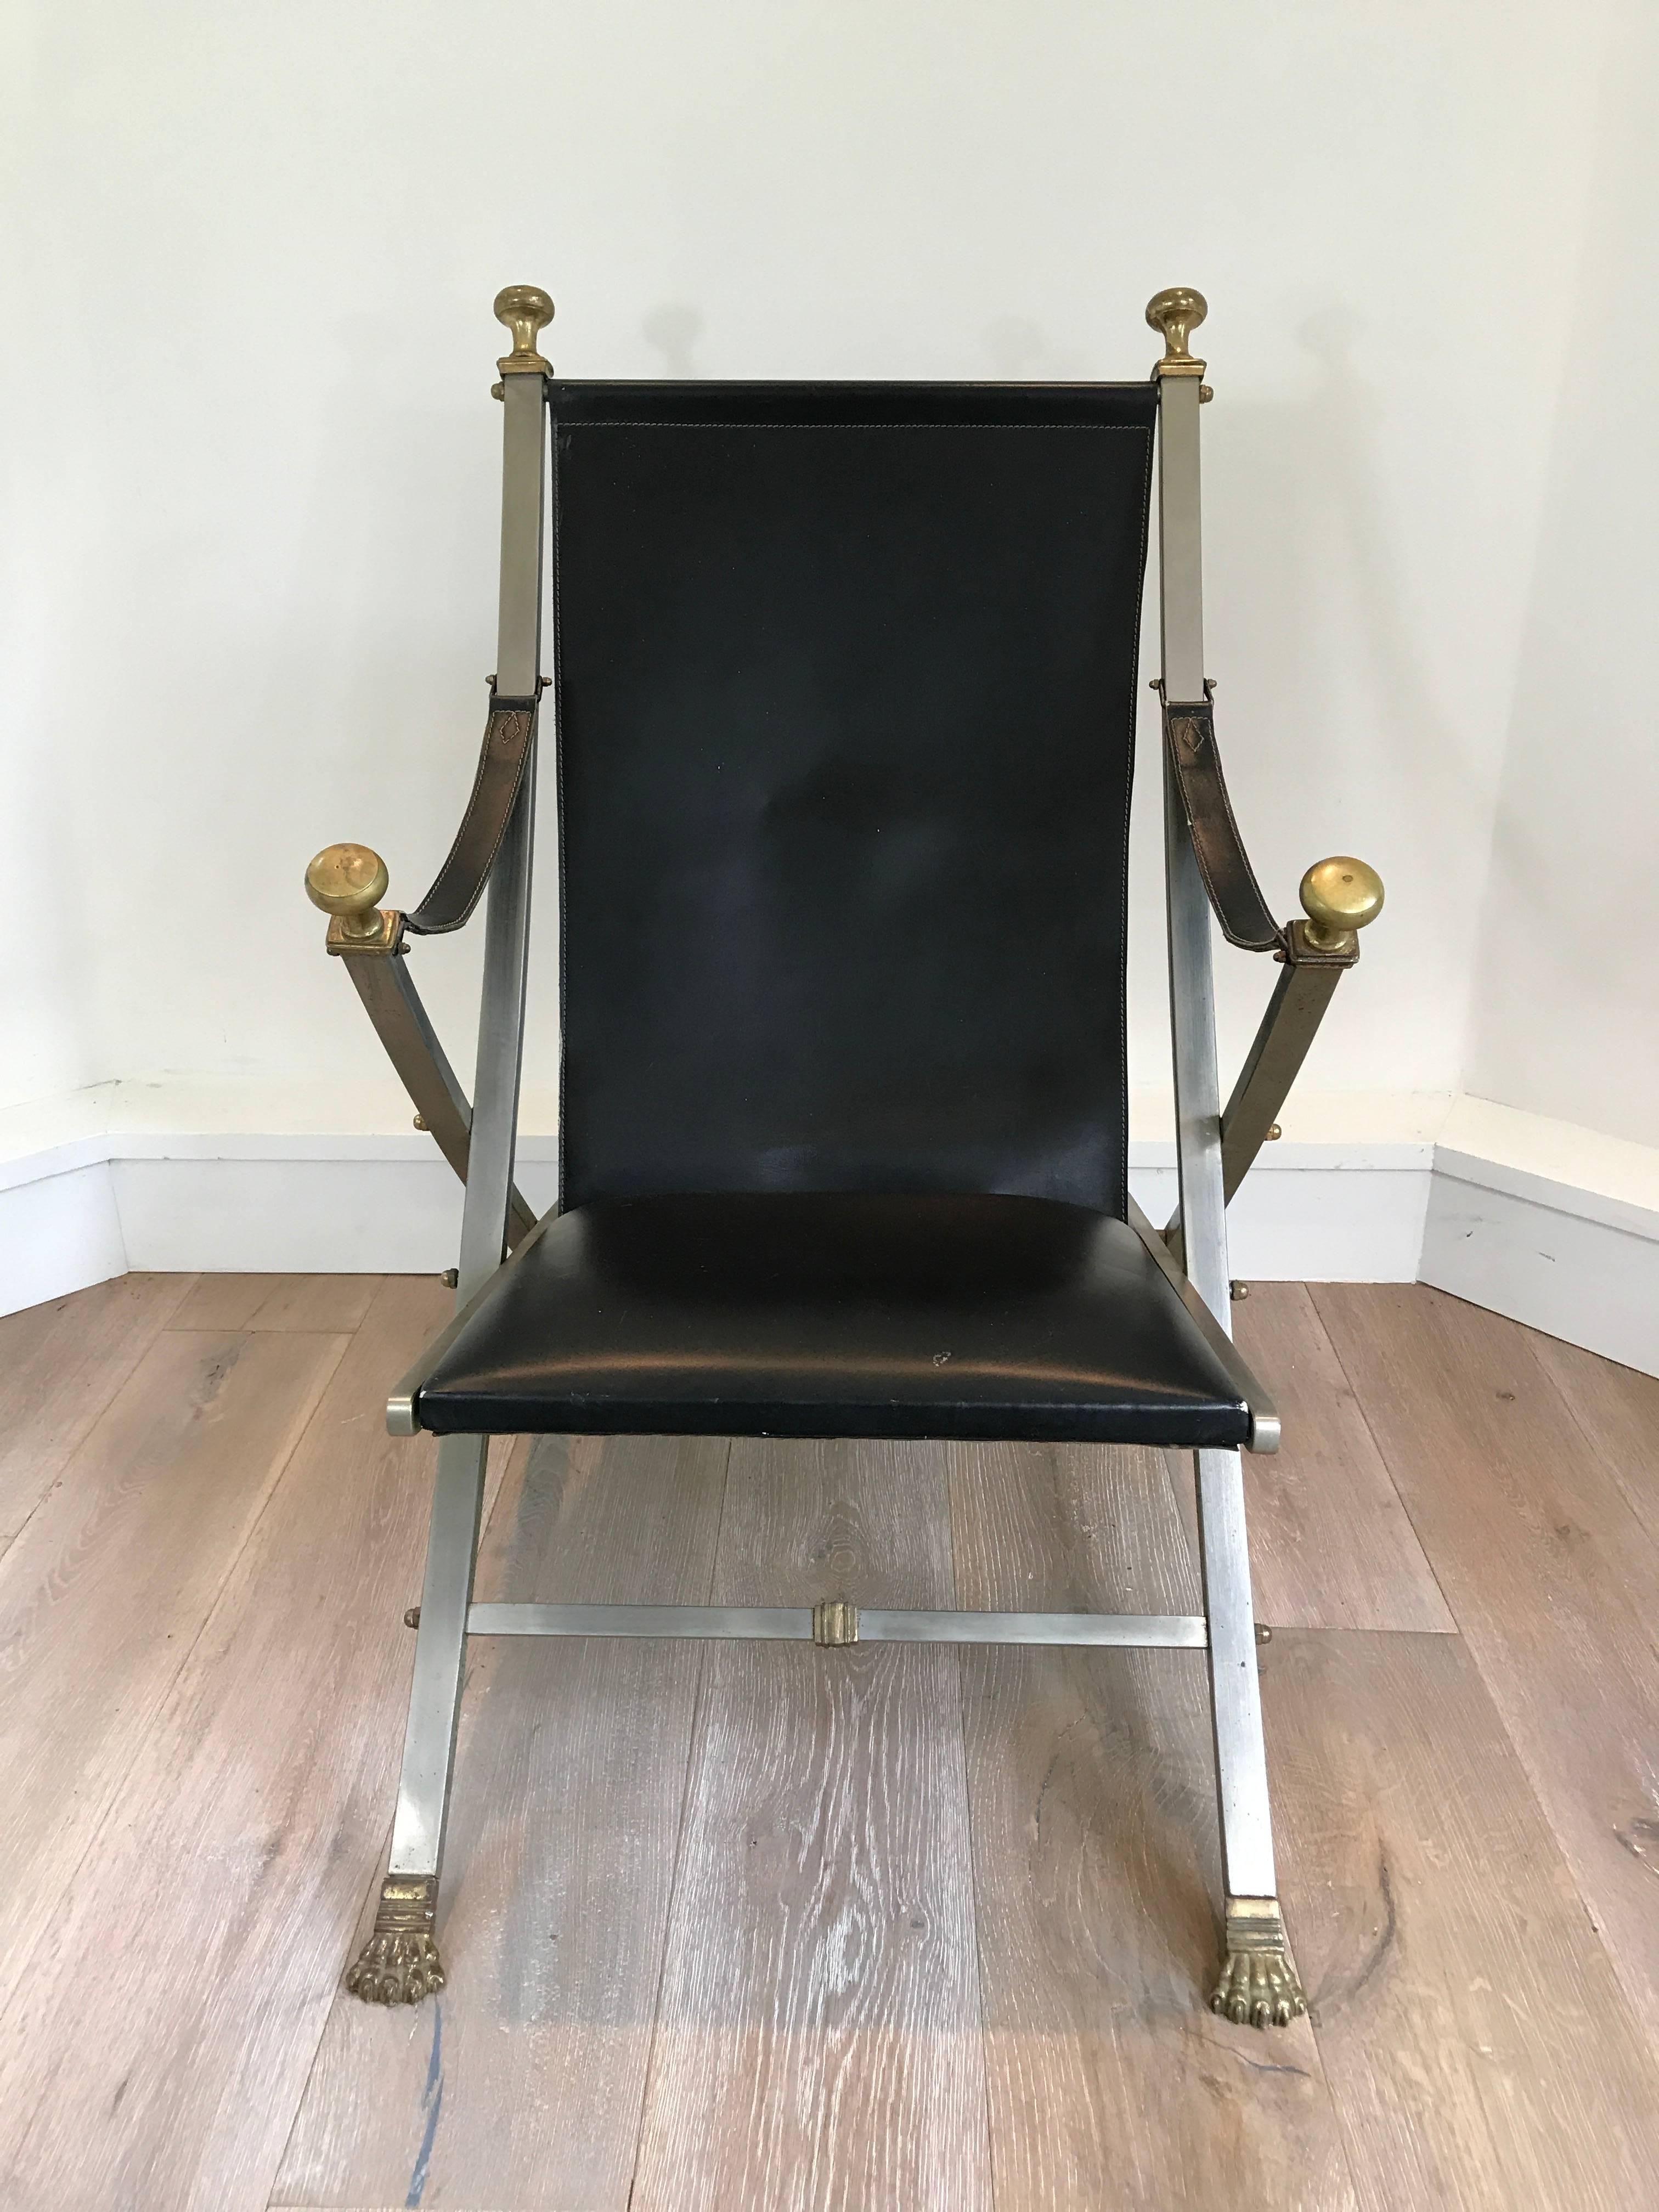 Pair of Maison Jansen campaign armchairs. Black leather seat with steel and brass accented frame. Wonderful patina to metal. Solid and heavy construction.